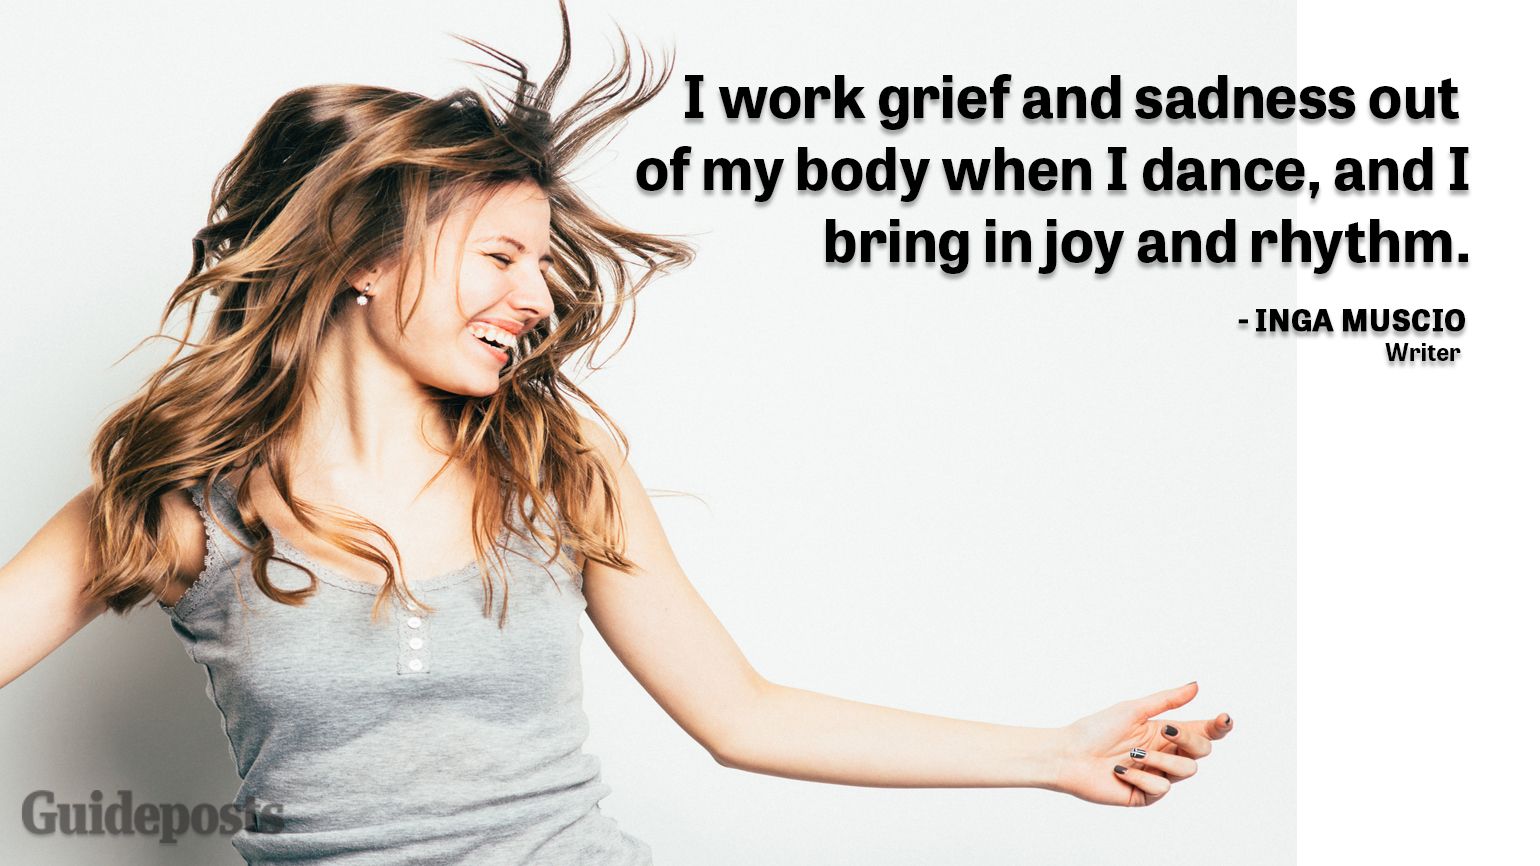 Uplifting Quotes to Cope with Grief "I work grief and sadness out of my body when I dance, and I bring in joy and rhythm." — Inga Muscio, Writer better living life advice